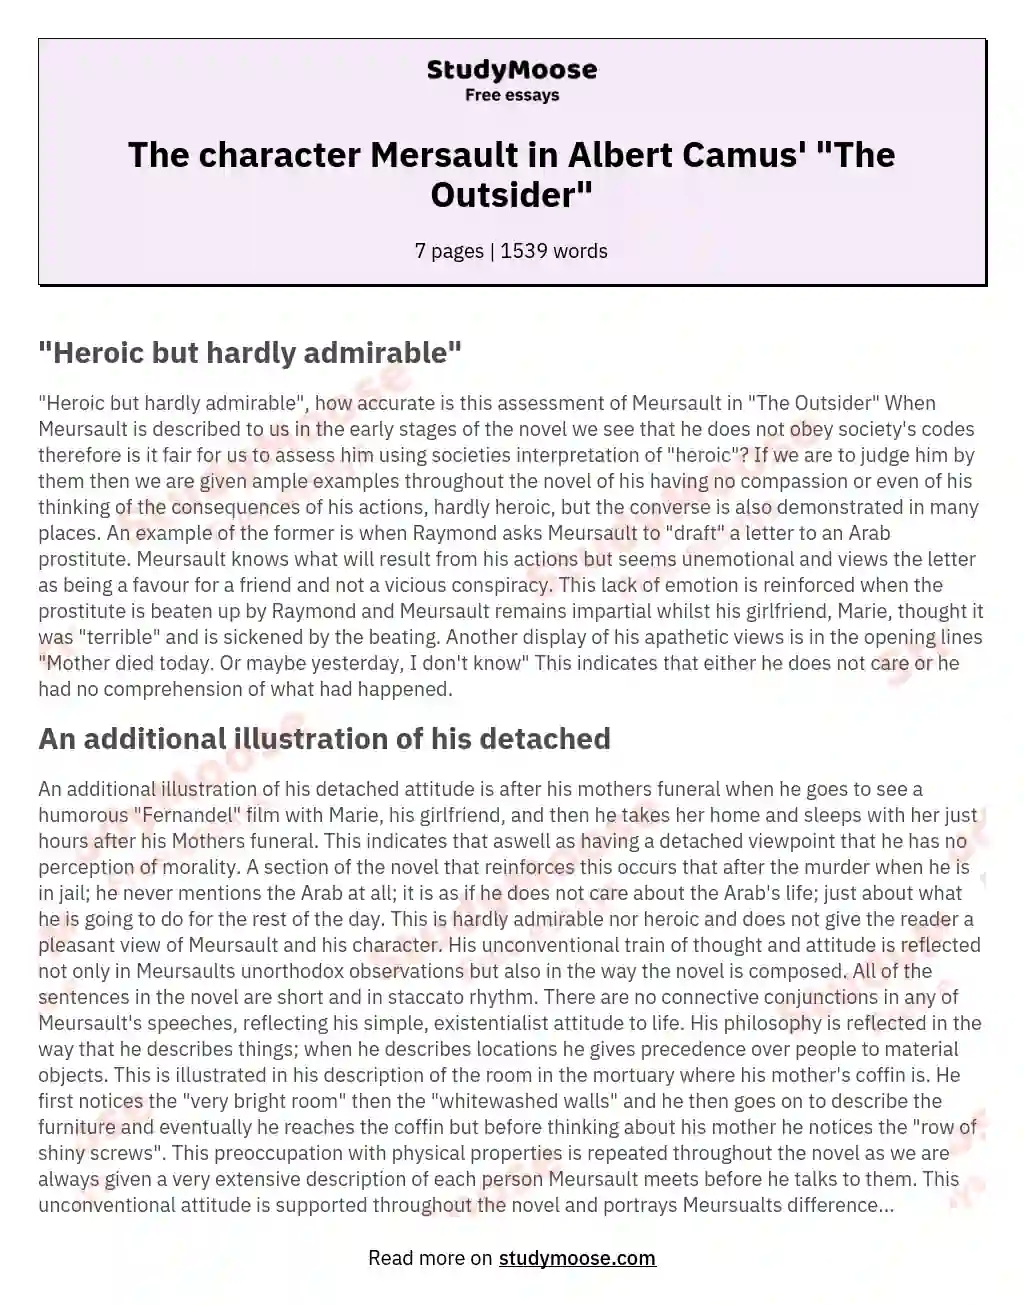 The character Mersault in Albert Camus' "The Outsider" essay